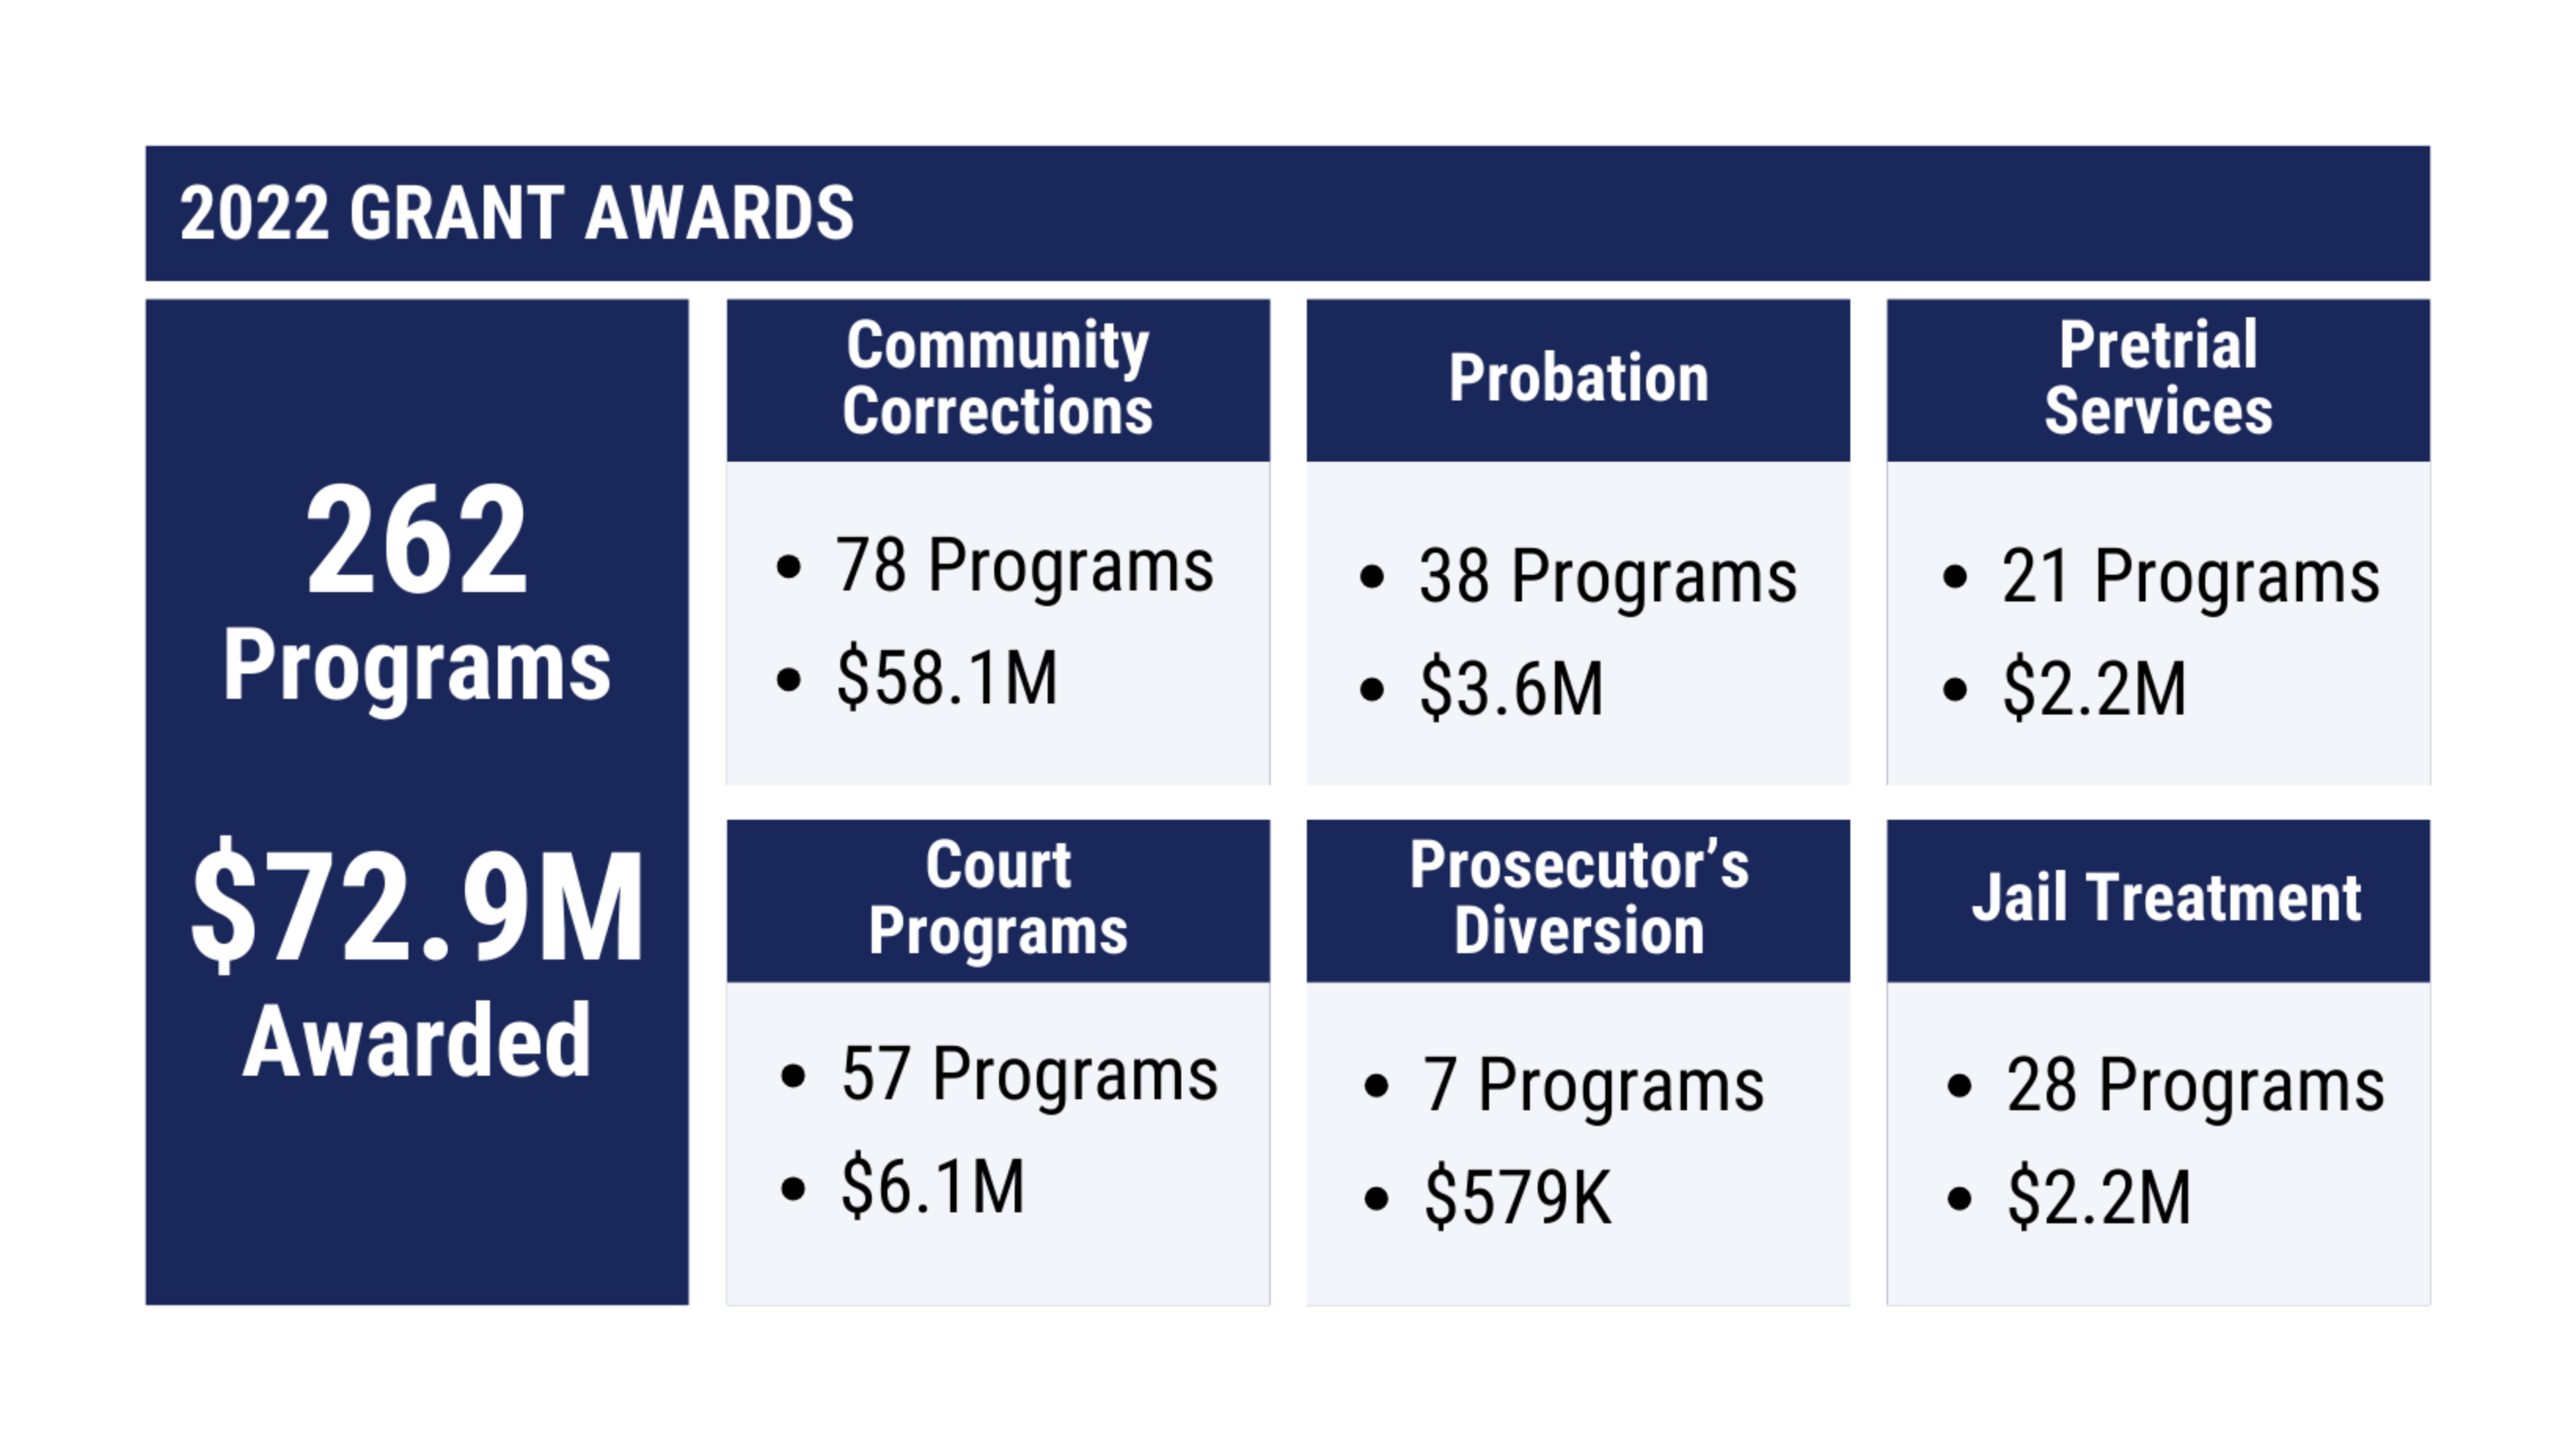 In 2022 there were a total of 262 programs with a total of $72.9 million awarded. For Community Corrections had 78 Programs totally $58.1 Million, Probation had 38 programs totaling $3.6 million, Pretrial Services had 21 programs totaling $2.2 Million, Court Programs had 57 programs totaling $6.1 Million, Prosecutor's Diversion had 7 Programs totaling $579 thousand, and Jail Treatment had 28 Programs totaling $2.2 Million.